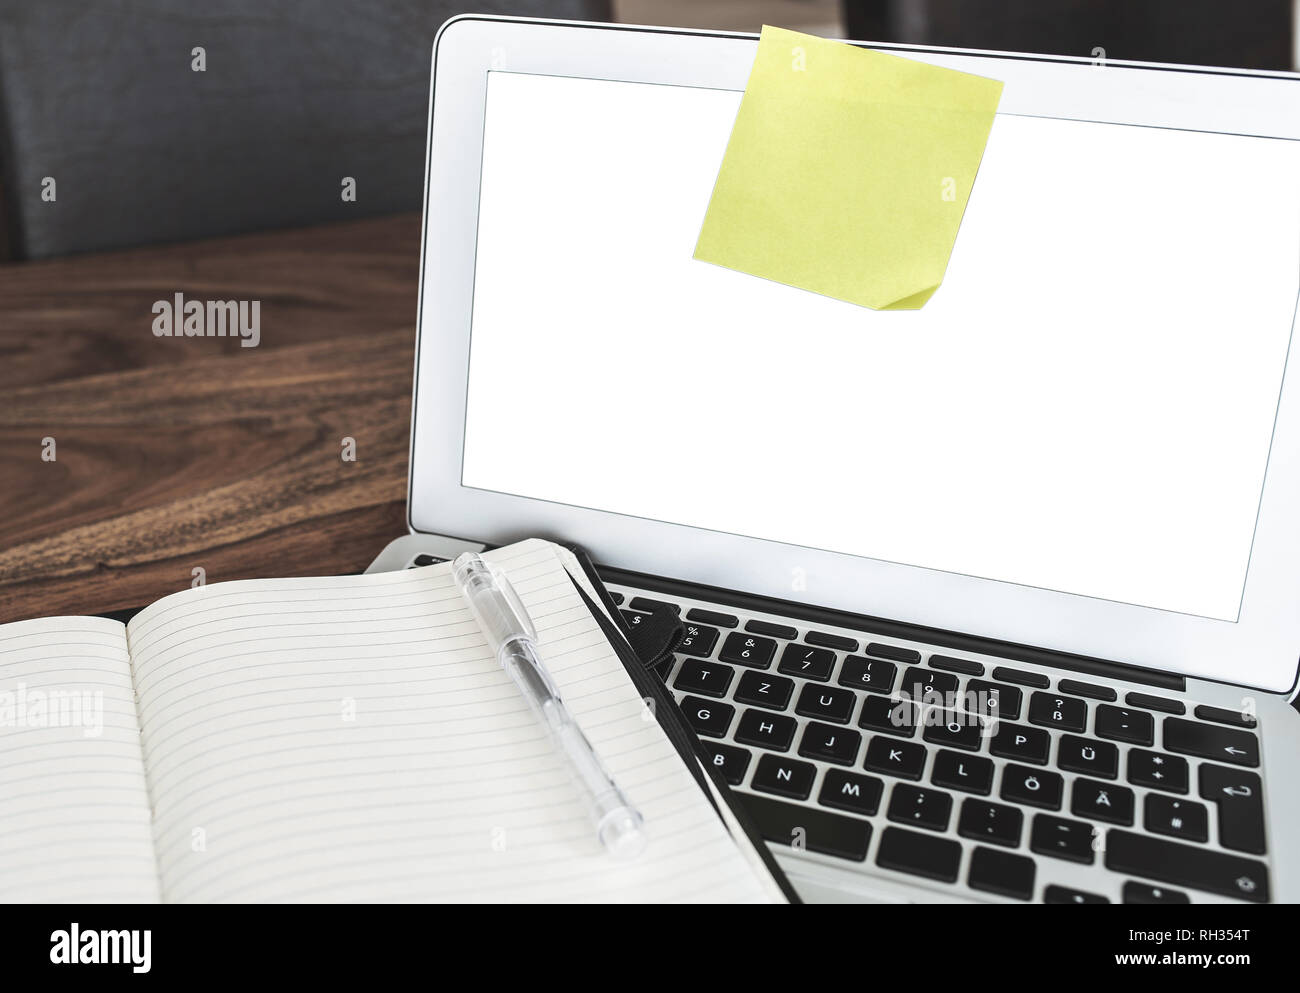 blank yellow adhesive note on laptop screen Stock Photo